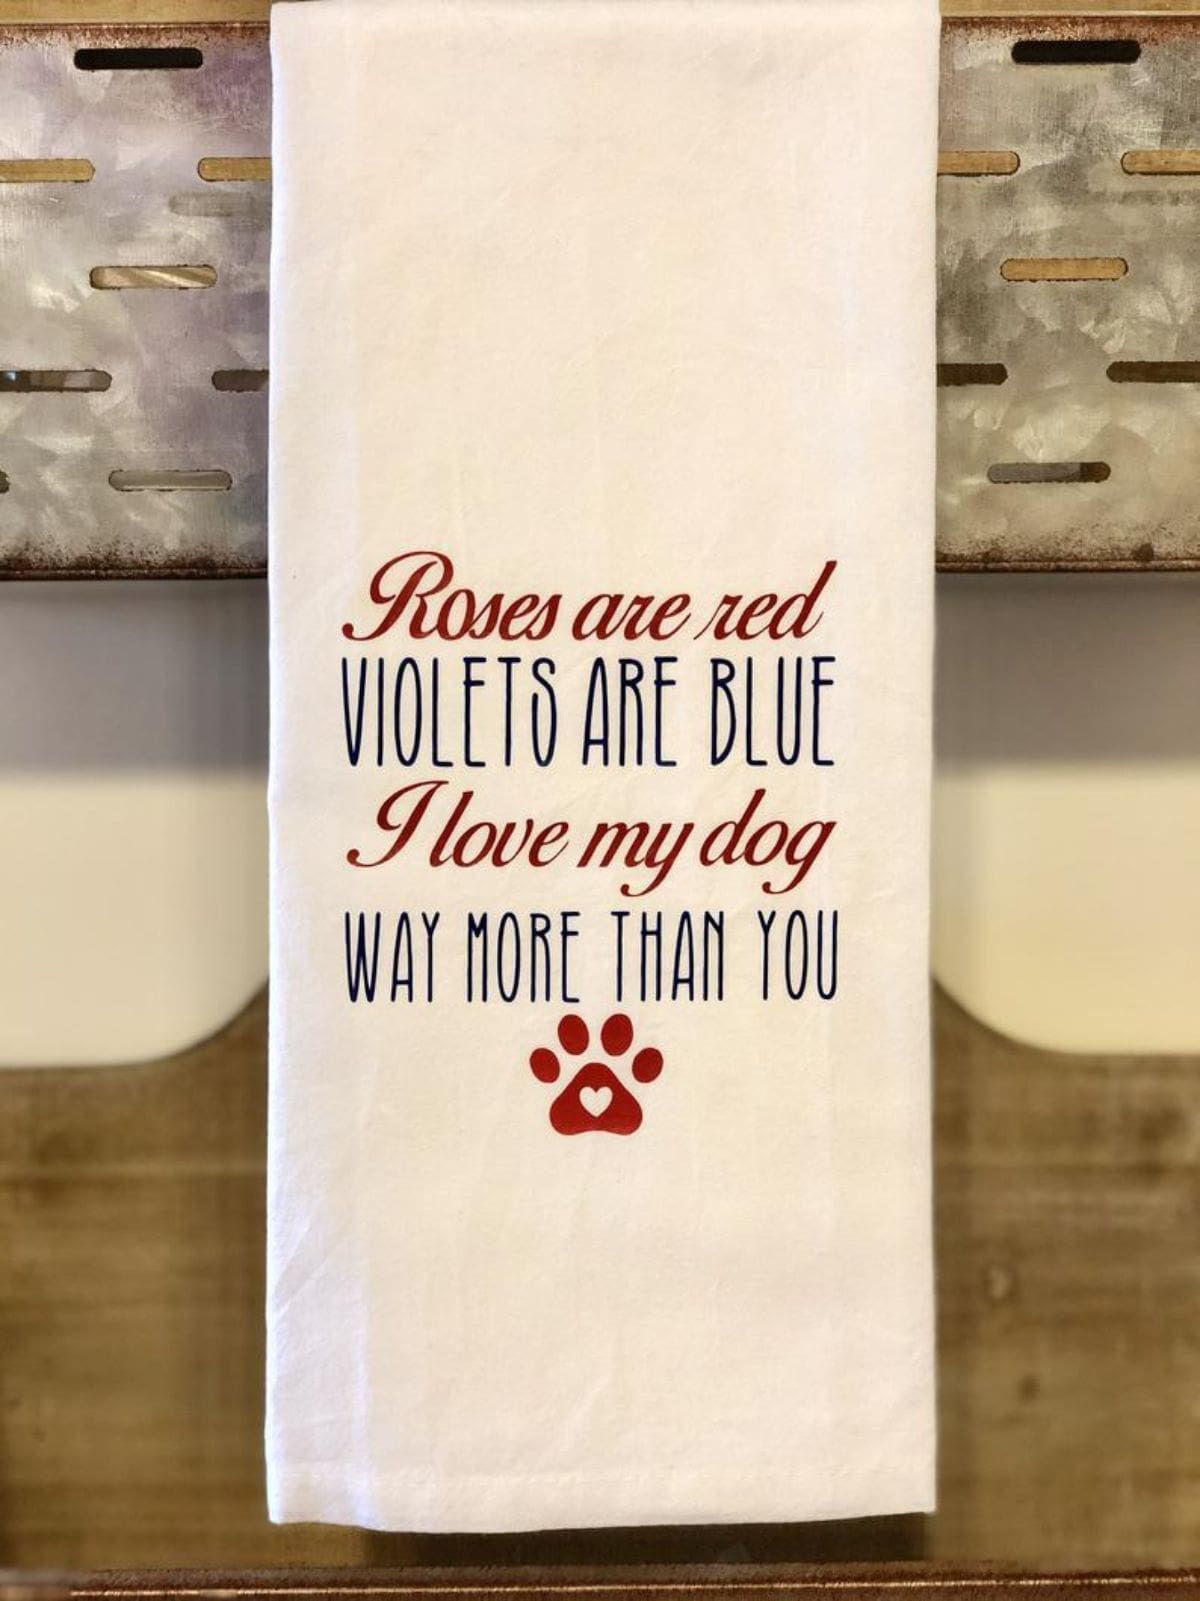 Resting on the top of a wooden cabinet is a cream tea towel with the red and black text "Roses are red, Violets are blue, I love my dog, whay more than you". UNderneath is a red paw print